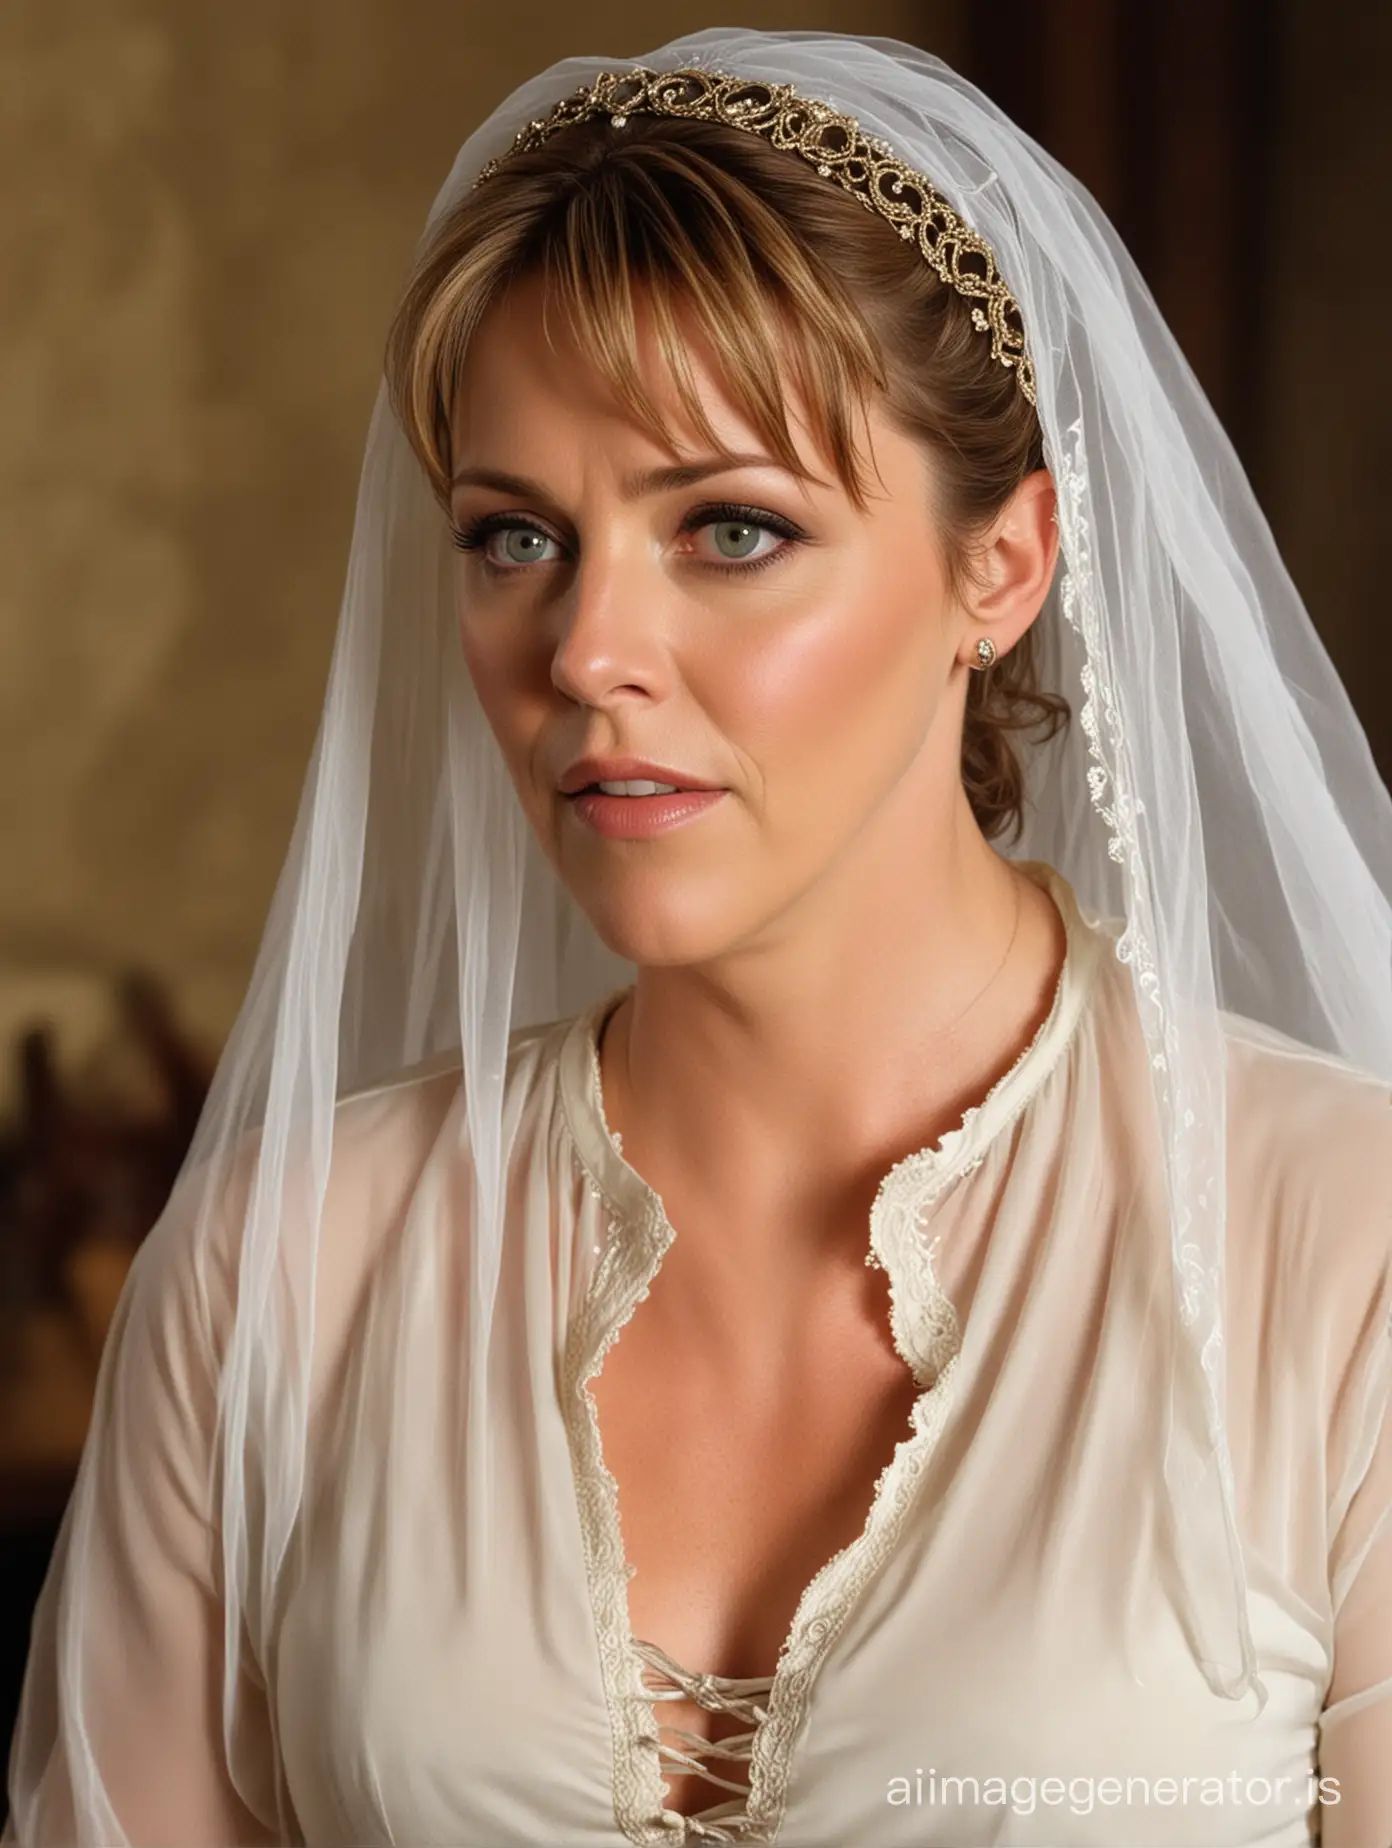 Amanda-Tapping-as-Major-Samantha-Carter-Hypnotized-in-Medieval-Compliant-Attire